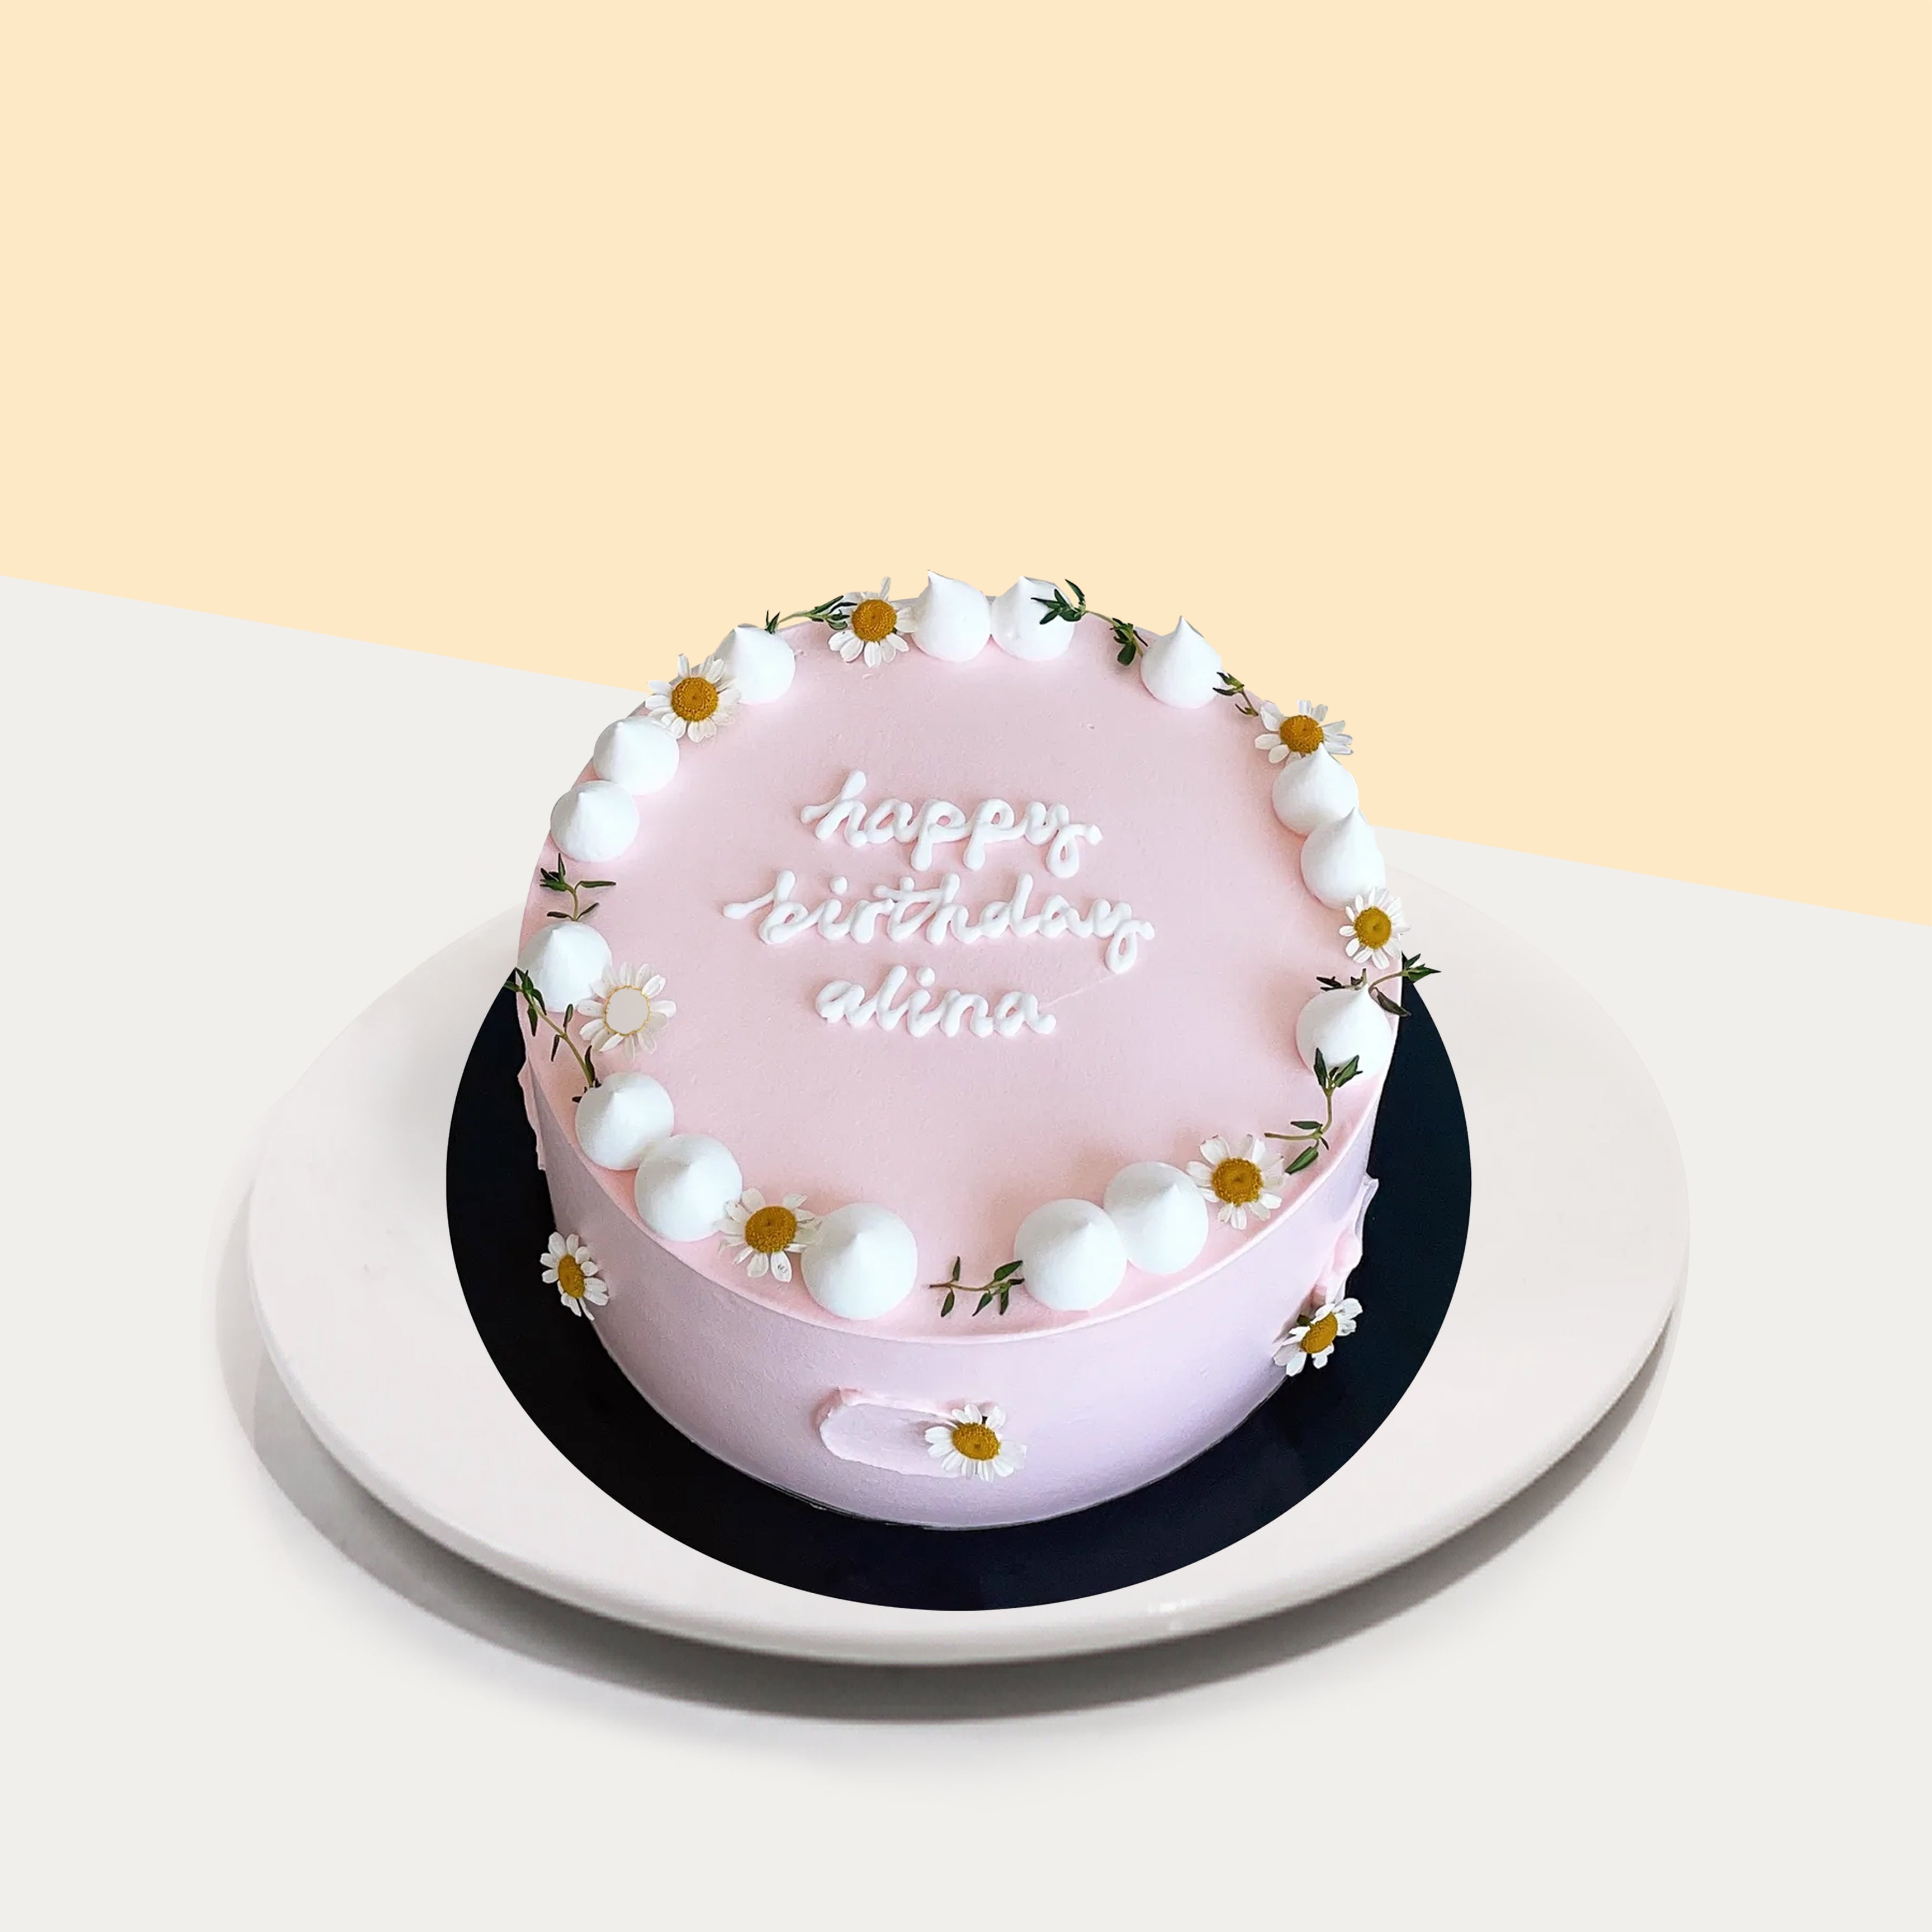 Marble Iced Coffee Birthday Cake in a Gift Box - The Simply Delicious Cake  Company